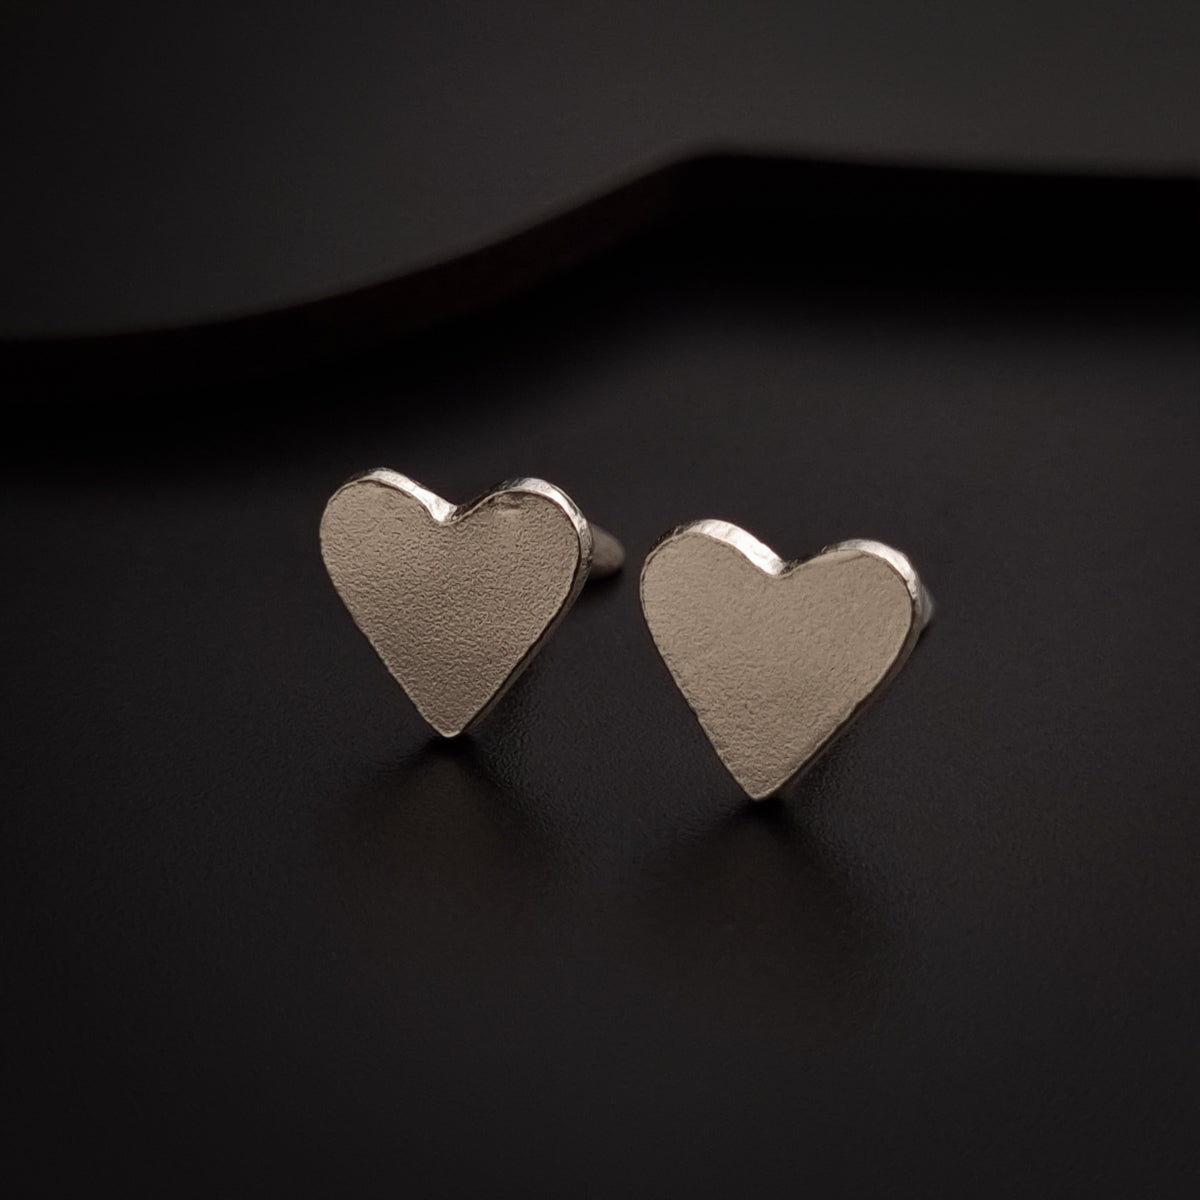 a pair of silver heart earrings on a black surface